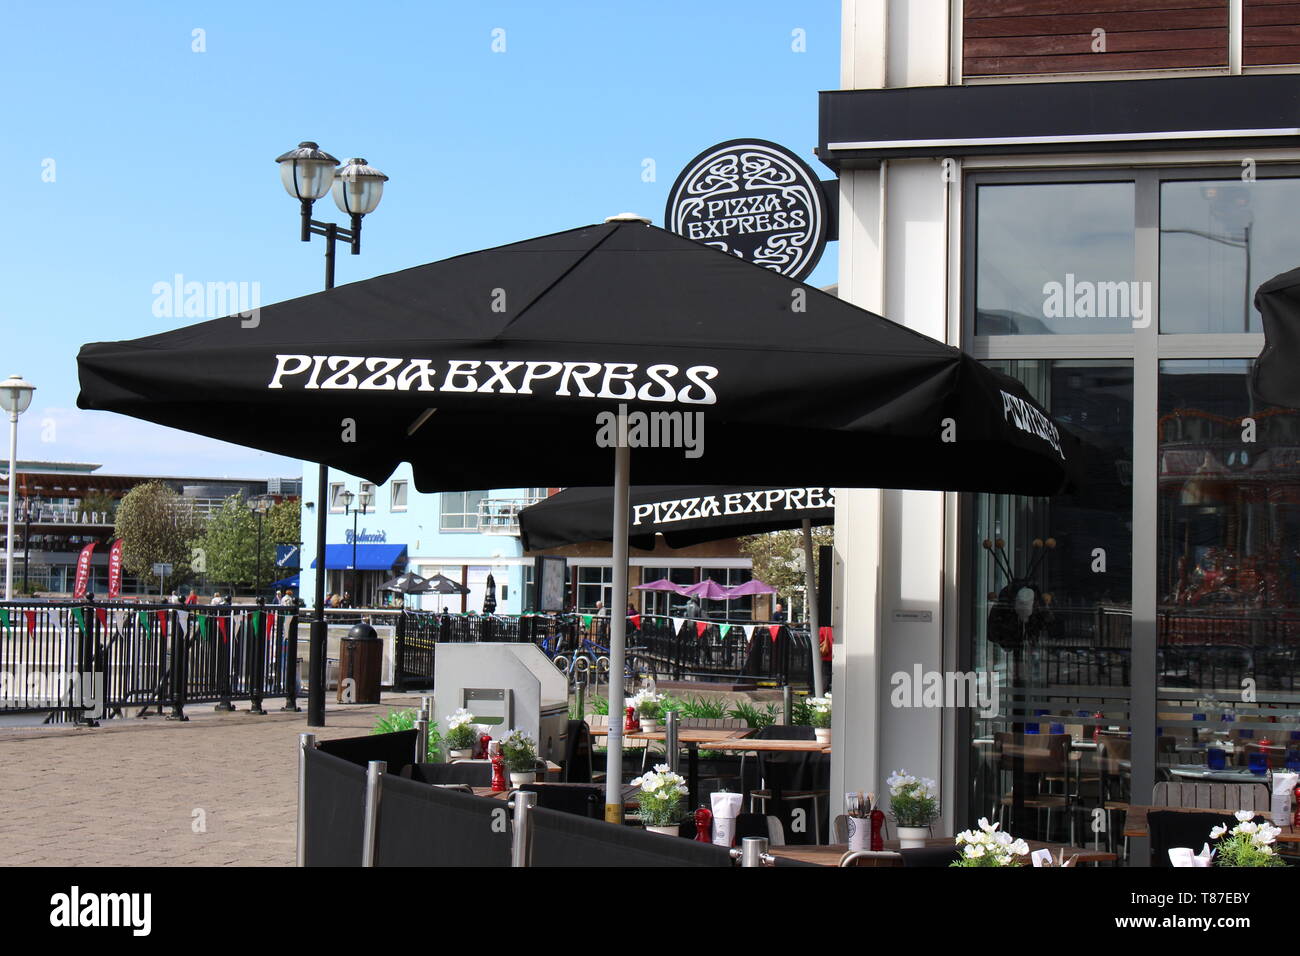 10 May 2019: Cardiff Bay, Cardiff UK:  Pizza Express in Cardiff Bay in the sunlight, waiting for the lunch hour rush.  Al fresco dining springtime. Stock Photo